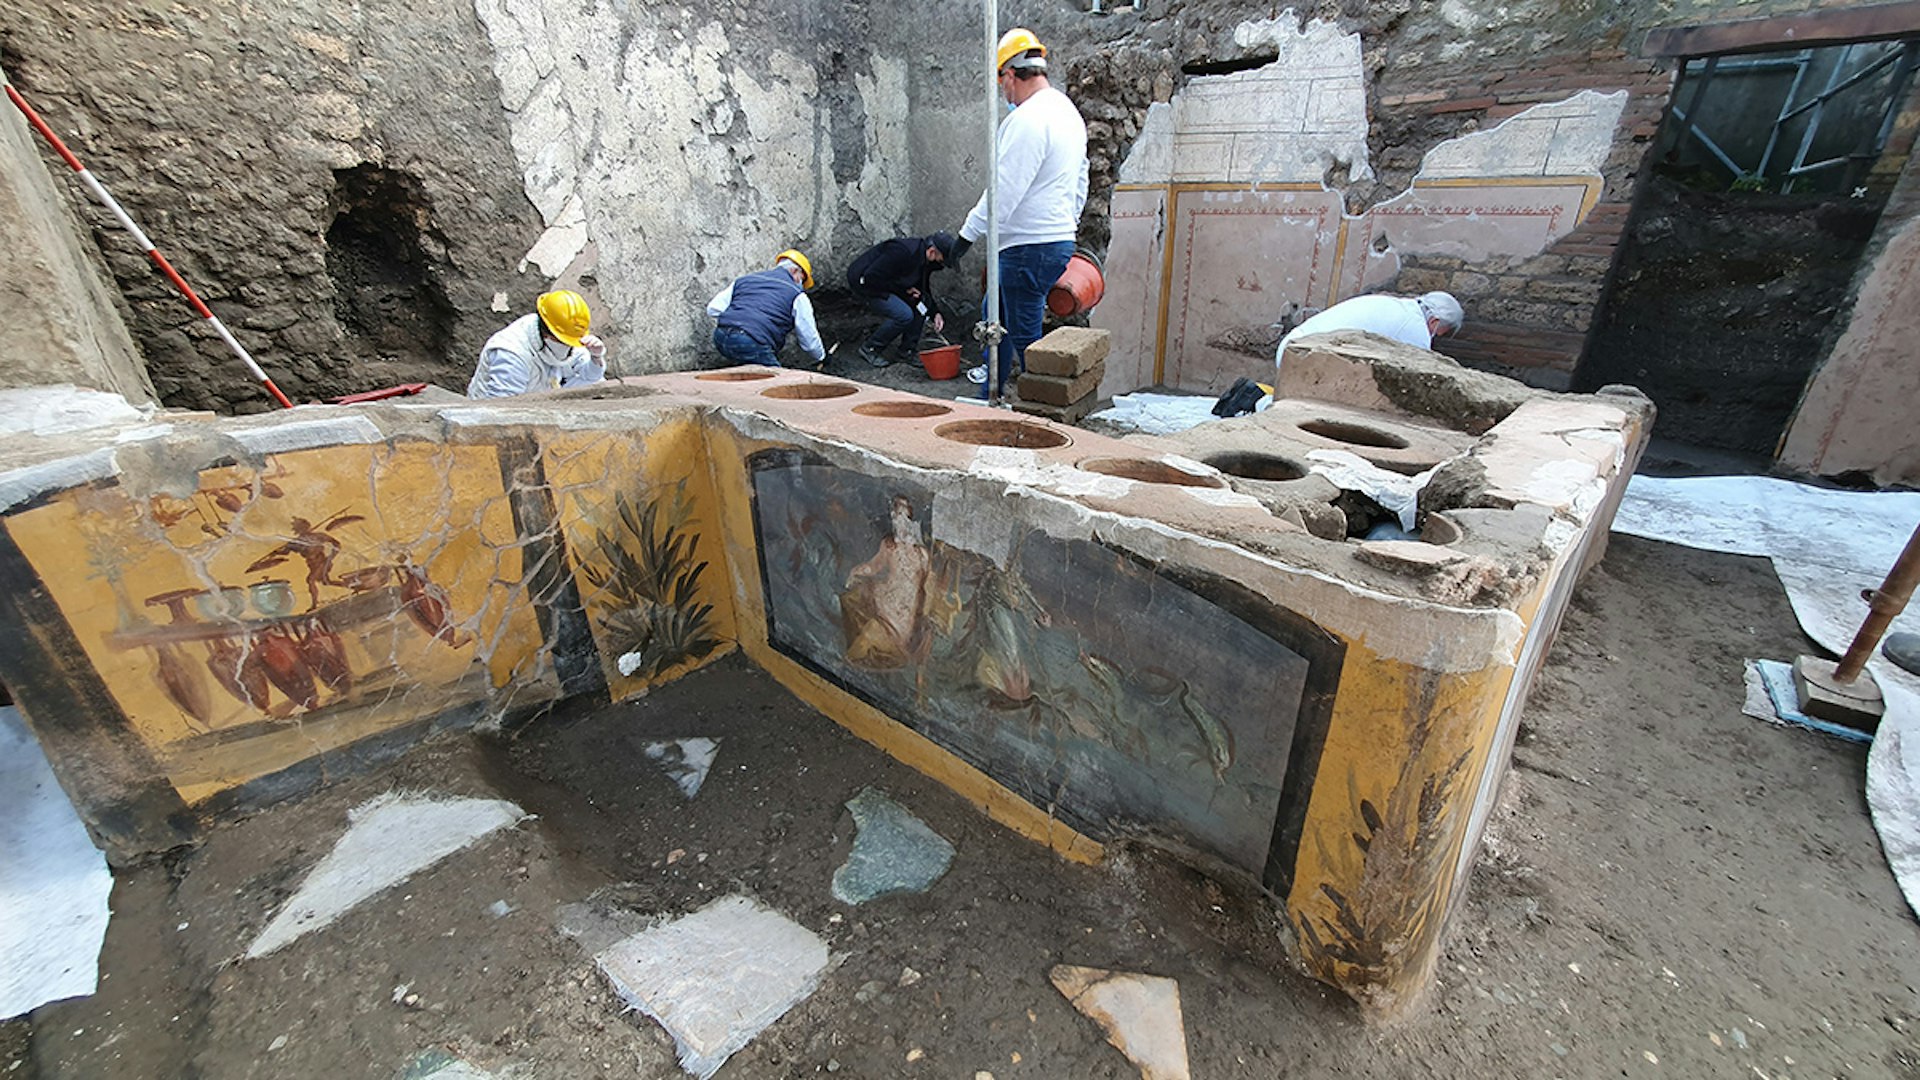 Archaeologists study frescoes at an ancient snack bar in Pompeii